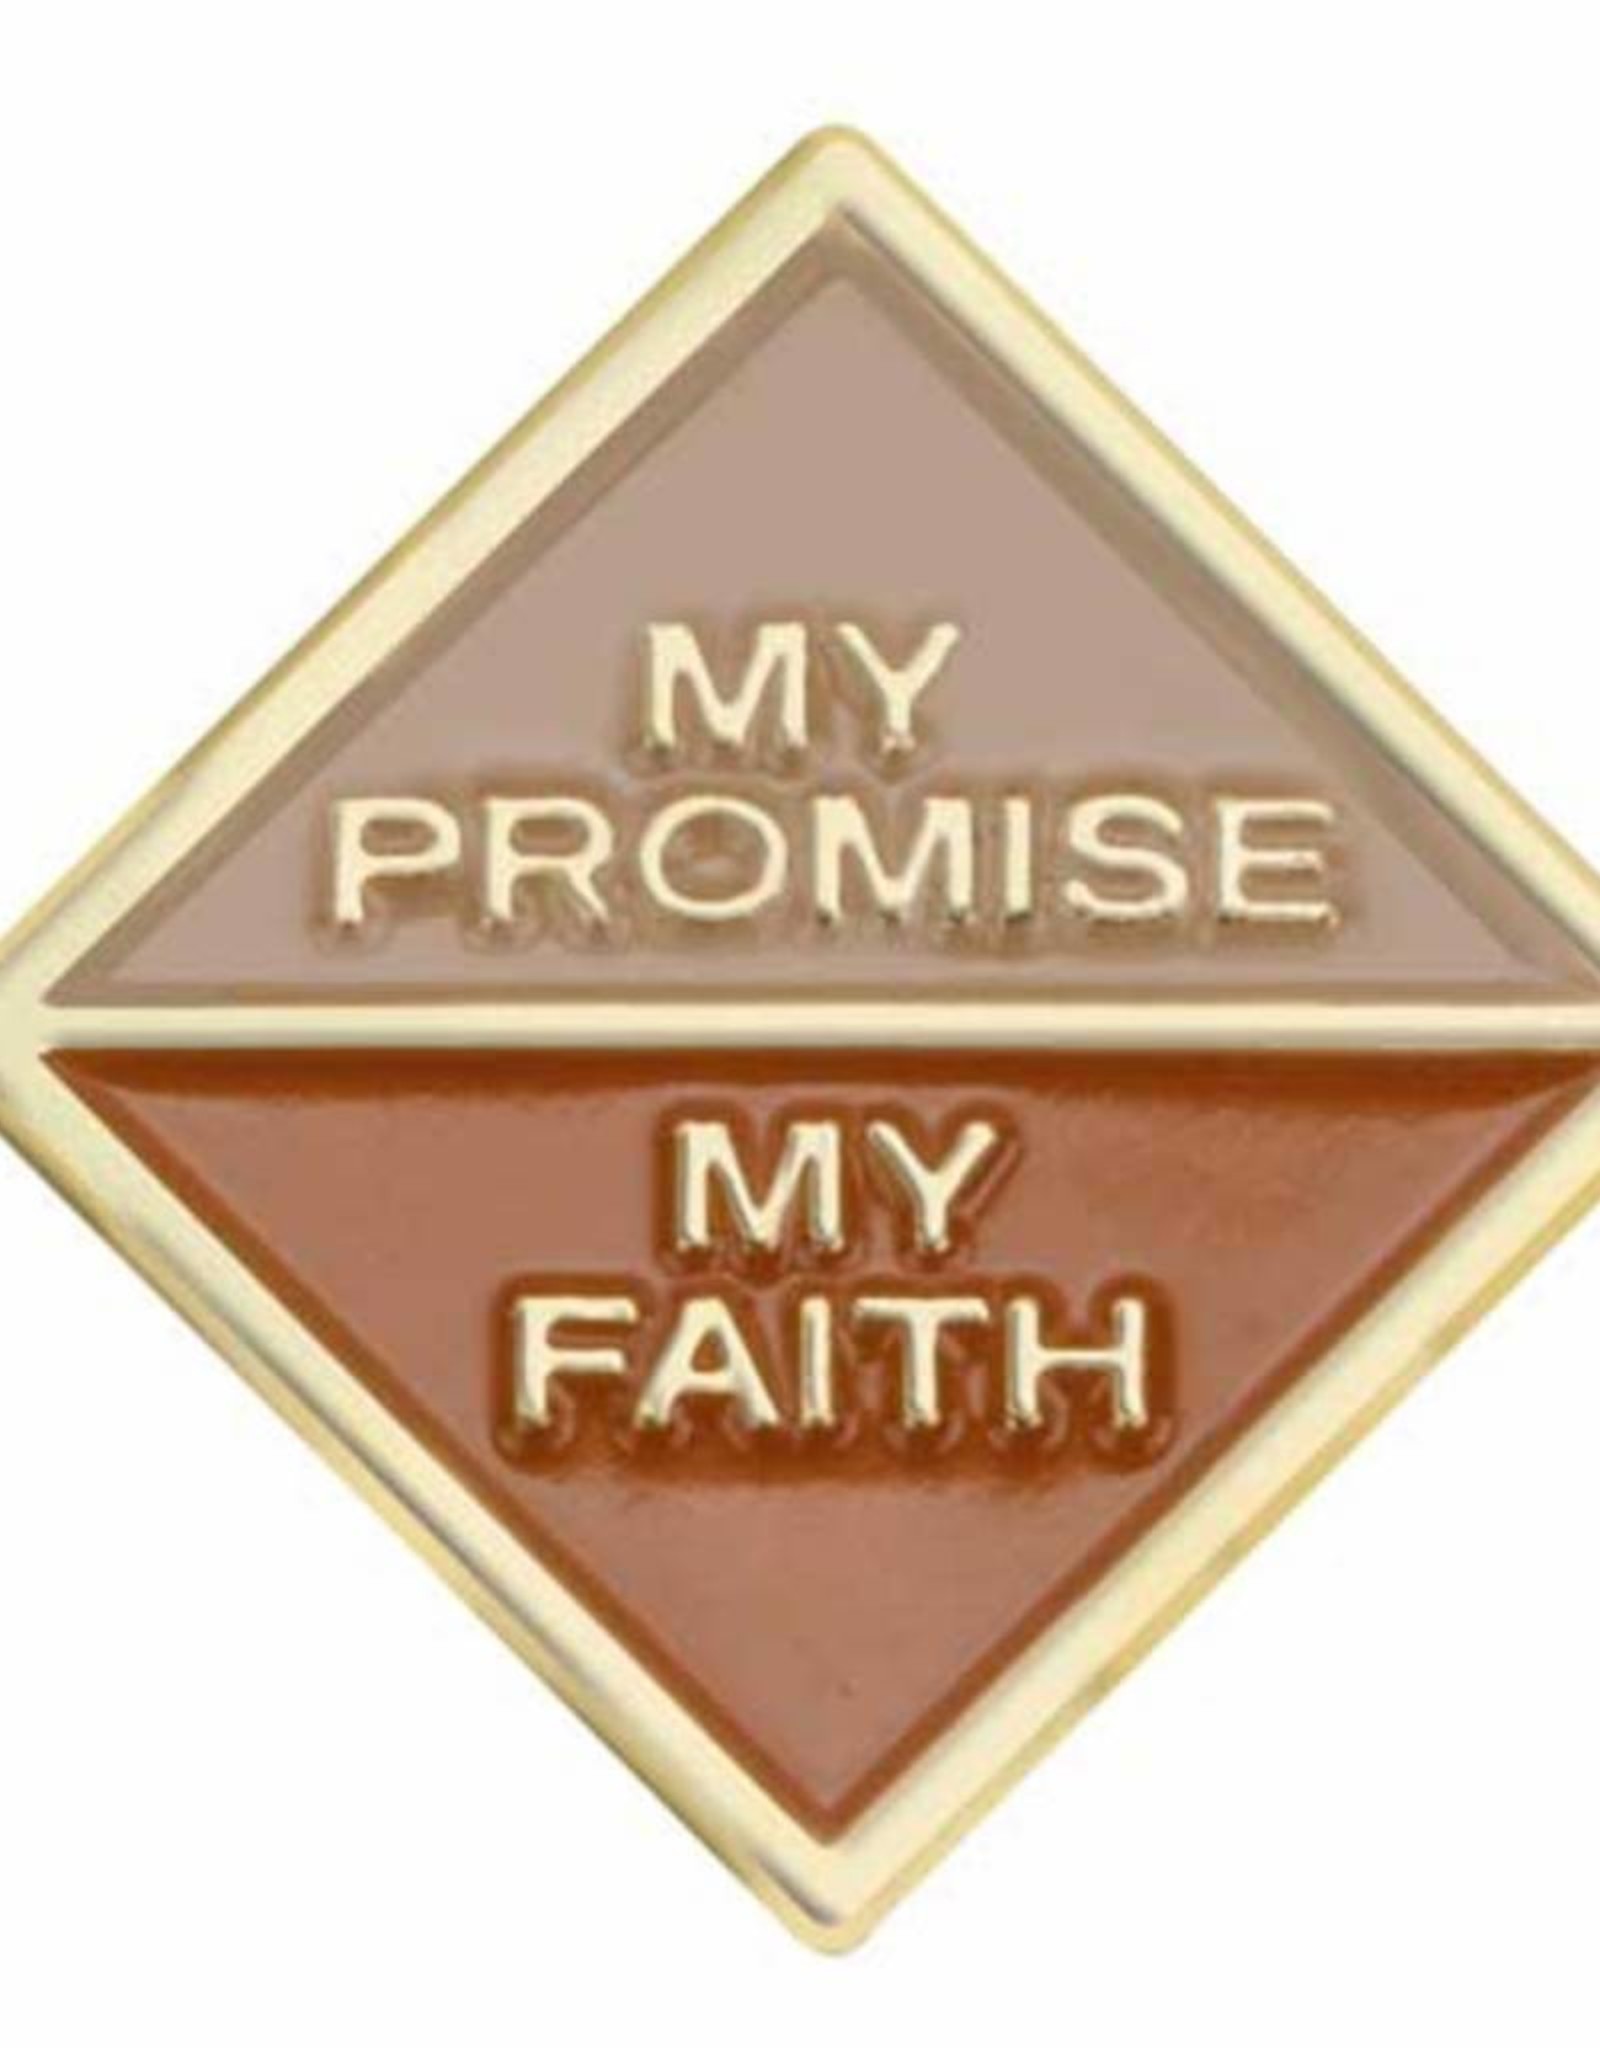 GIRL SCOUTS OF THE USA Brownie My Promise/Faith Pin 1